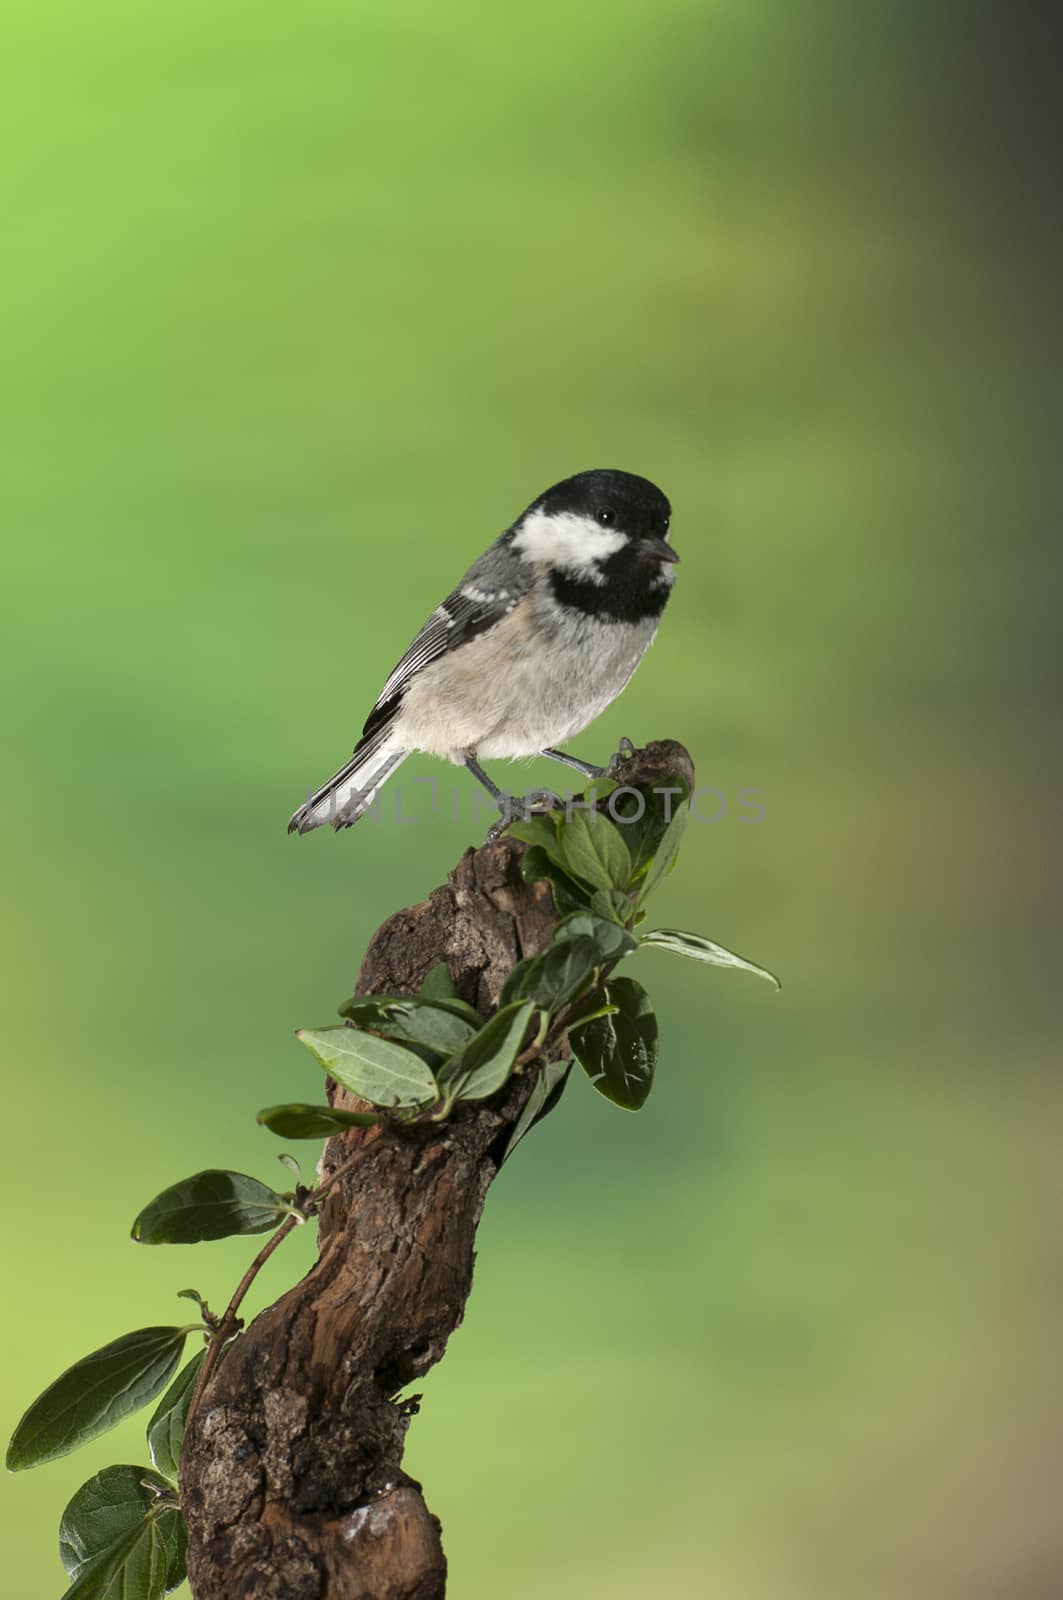 Coal tit (Periparus ater), bird looking for food by jalonsohu@gmail.com